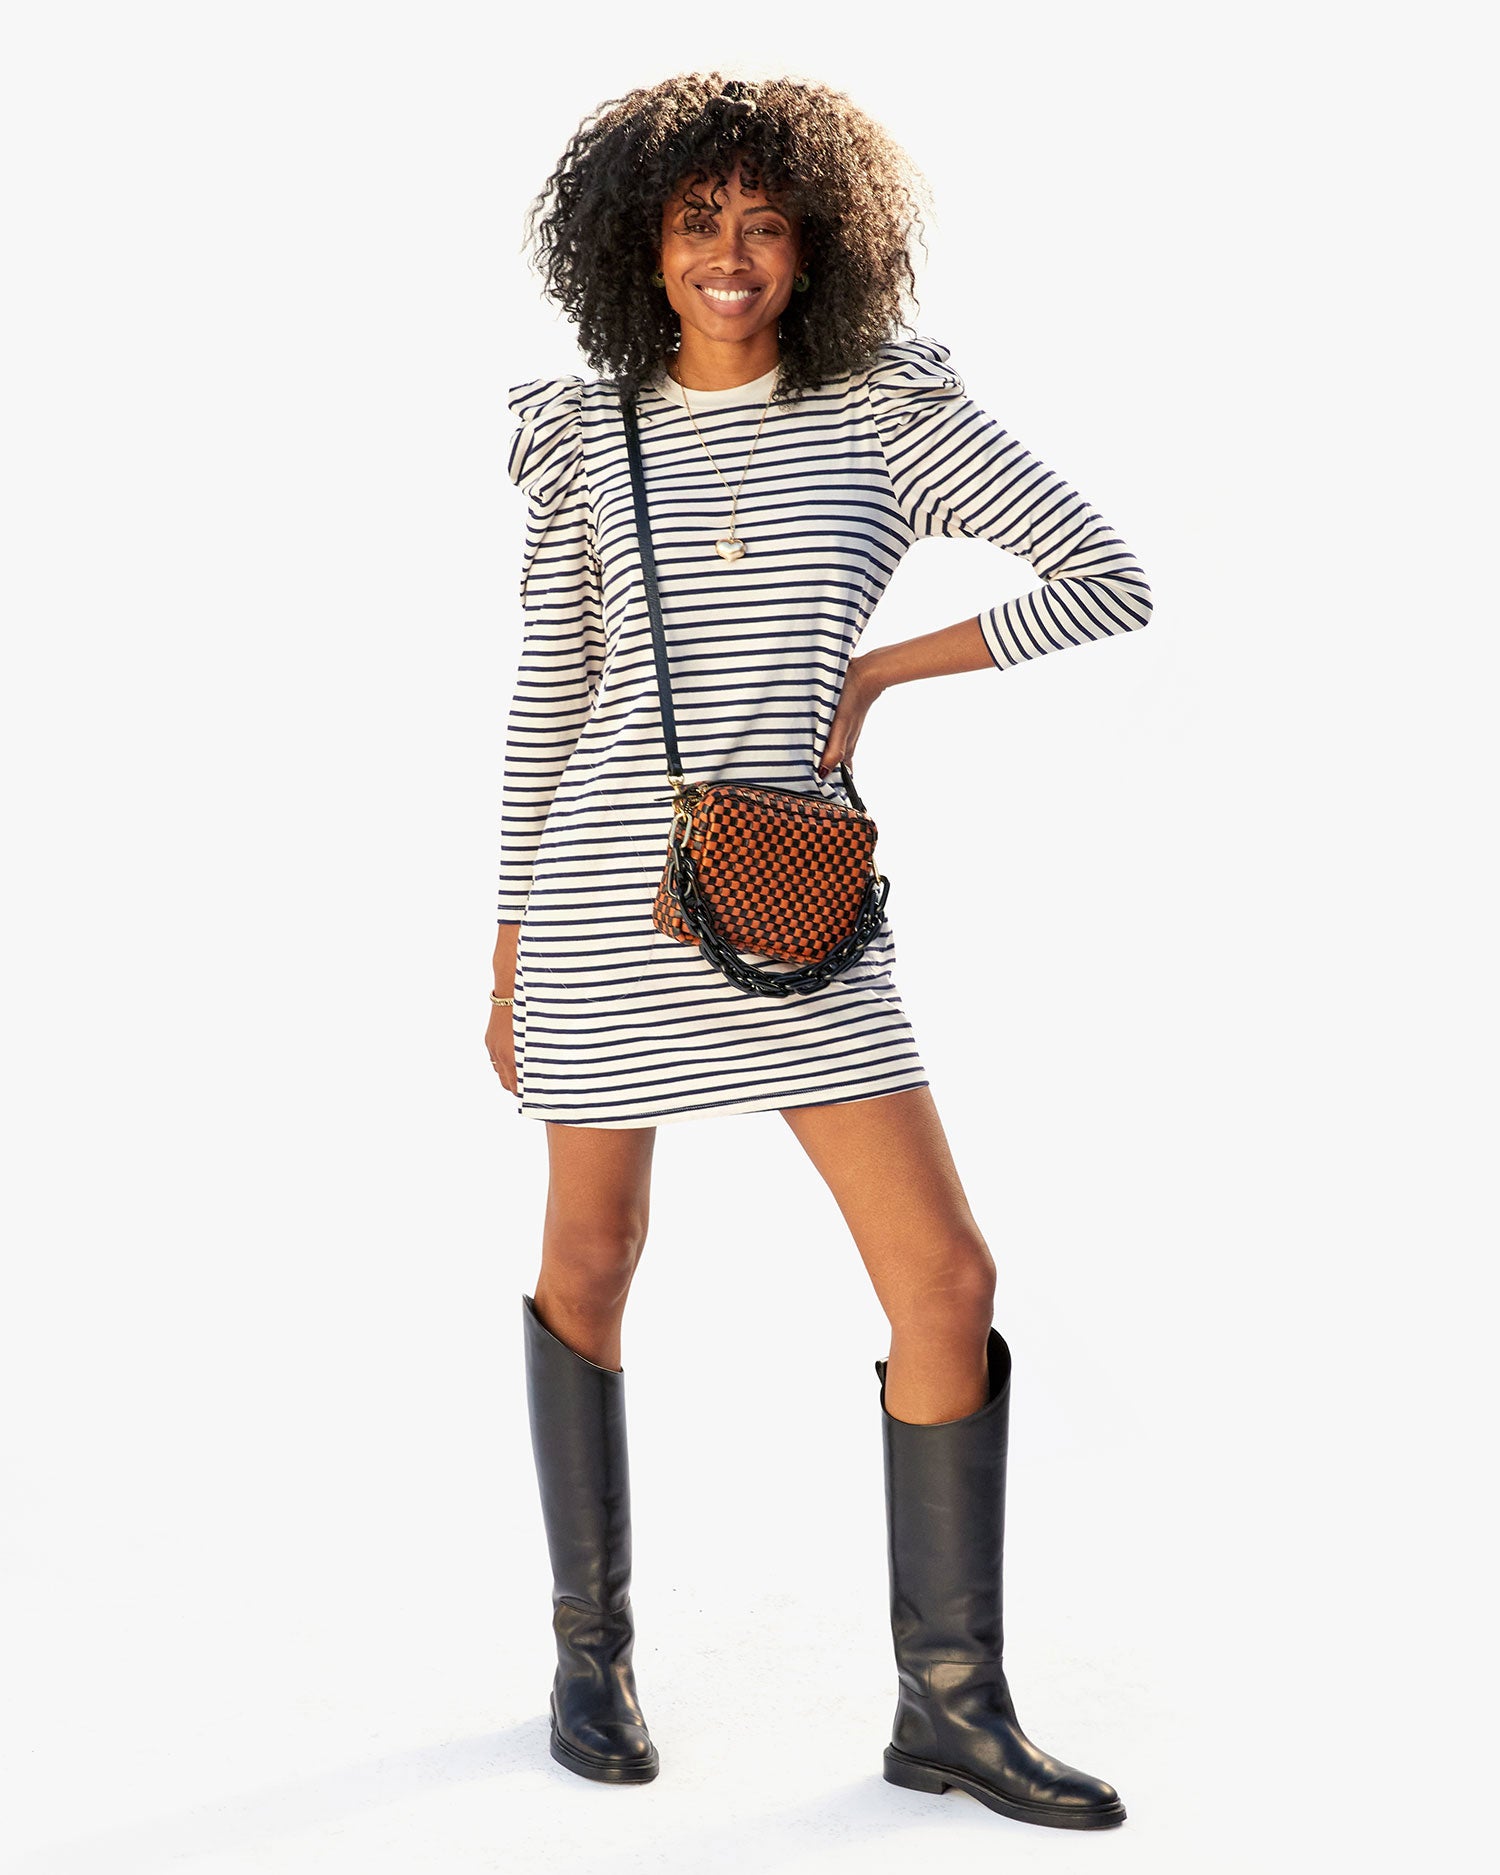 mecca wearing the black and natural checker midi sac crossbody over the Le Puff Dress in Navy & Cream Stripe